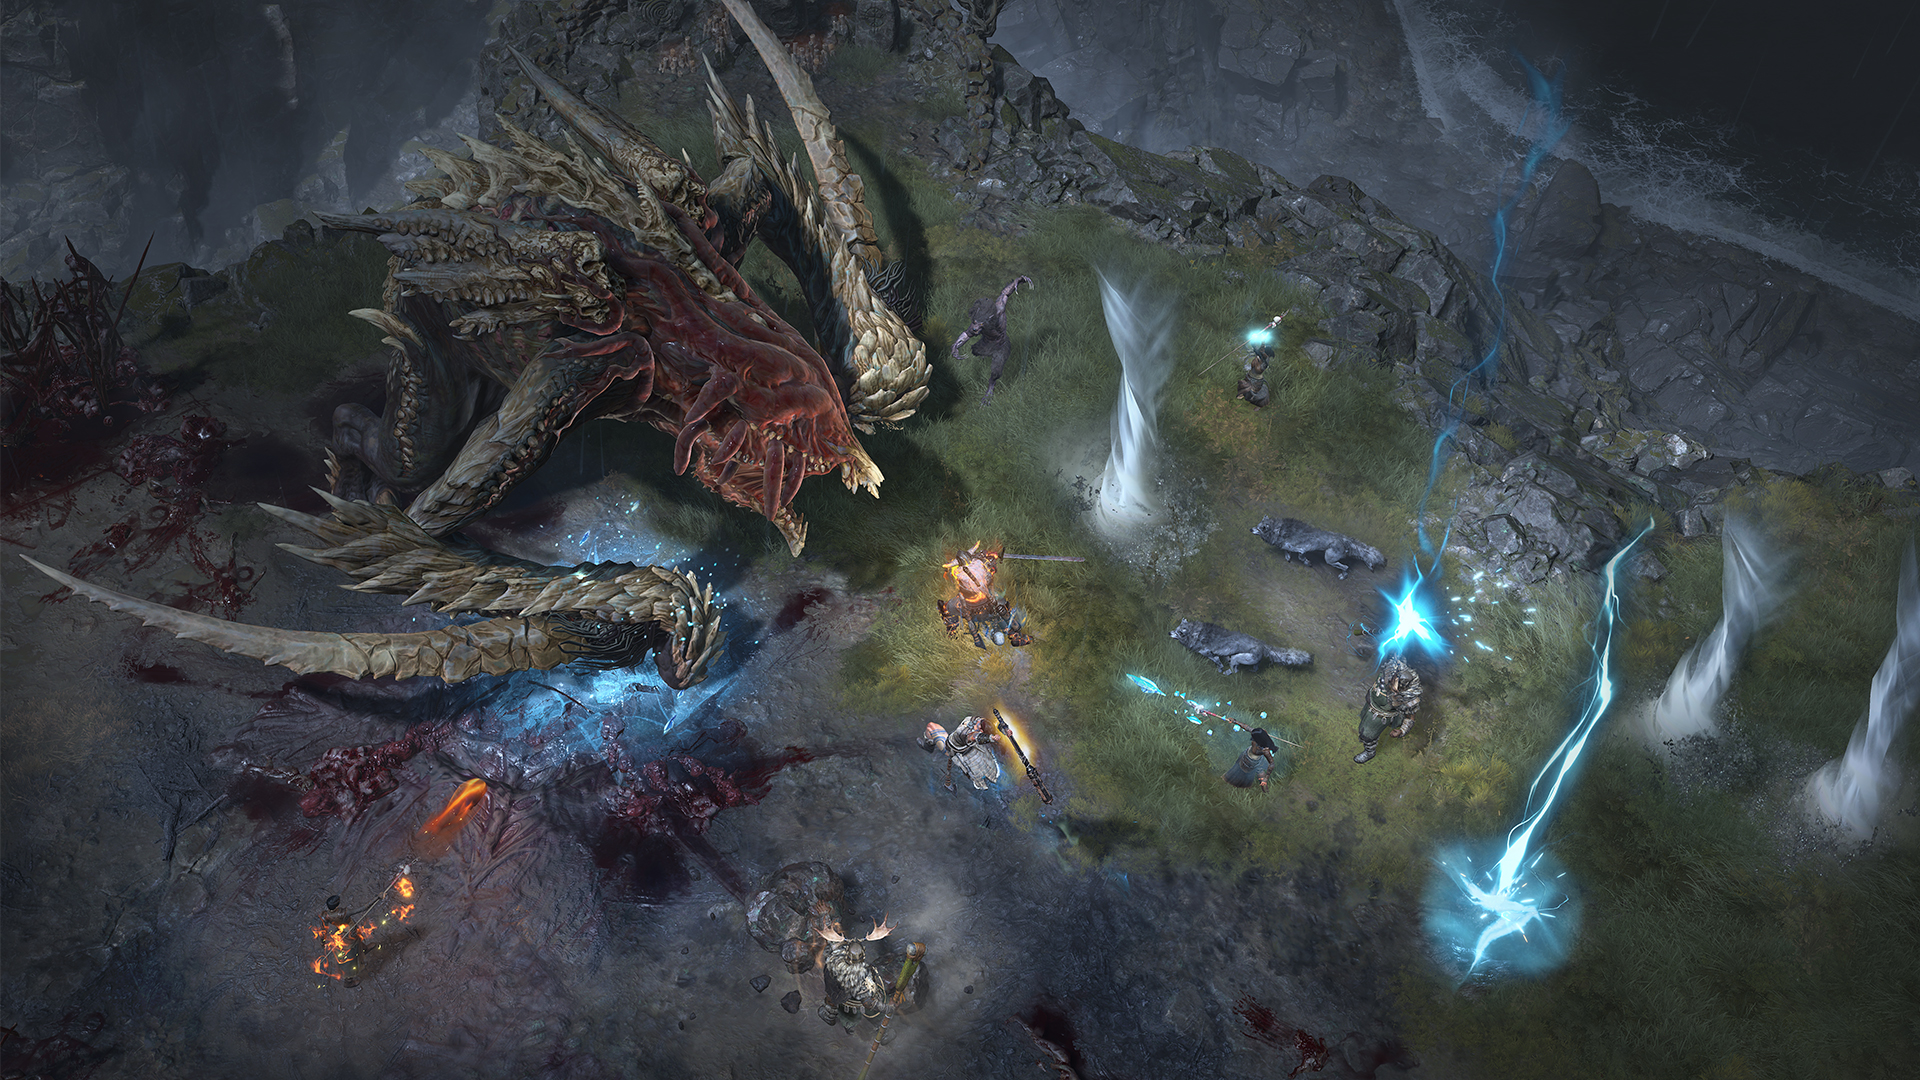 10 games like Diablo to play if you’re bored of waiting for Diablo 4